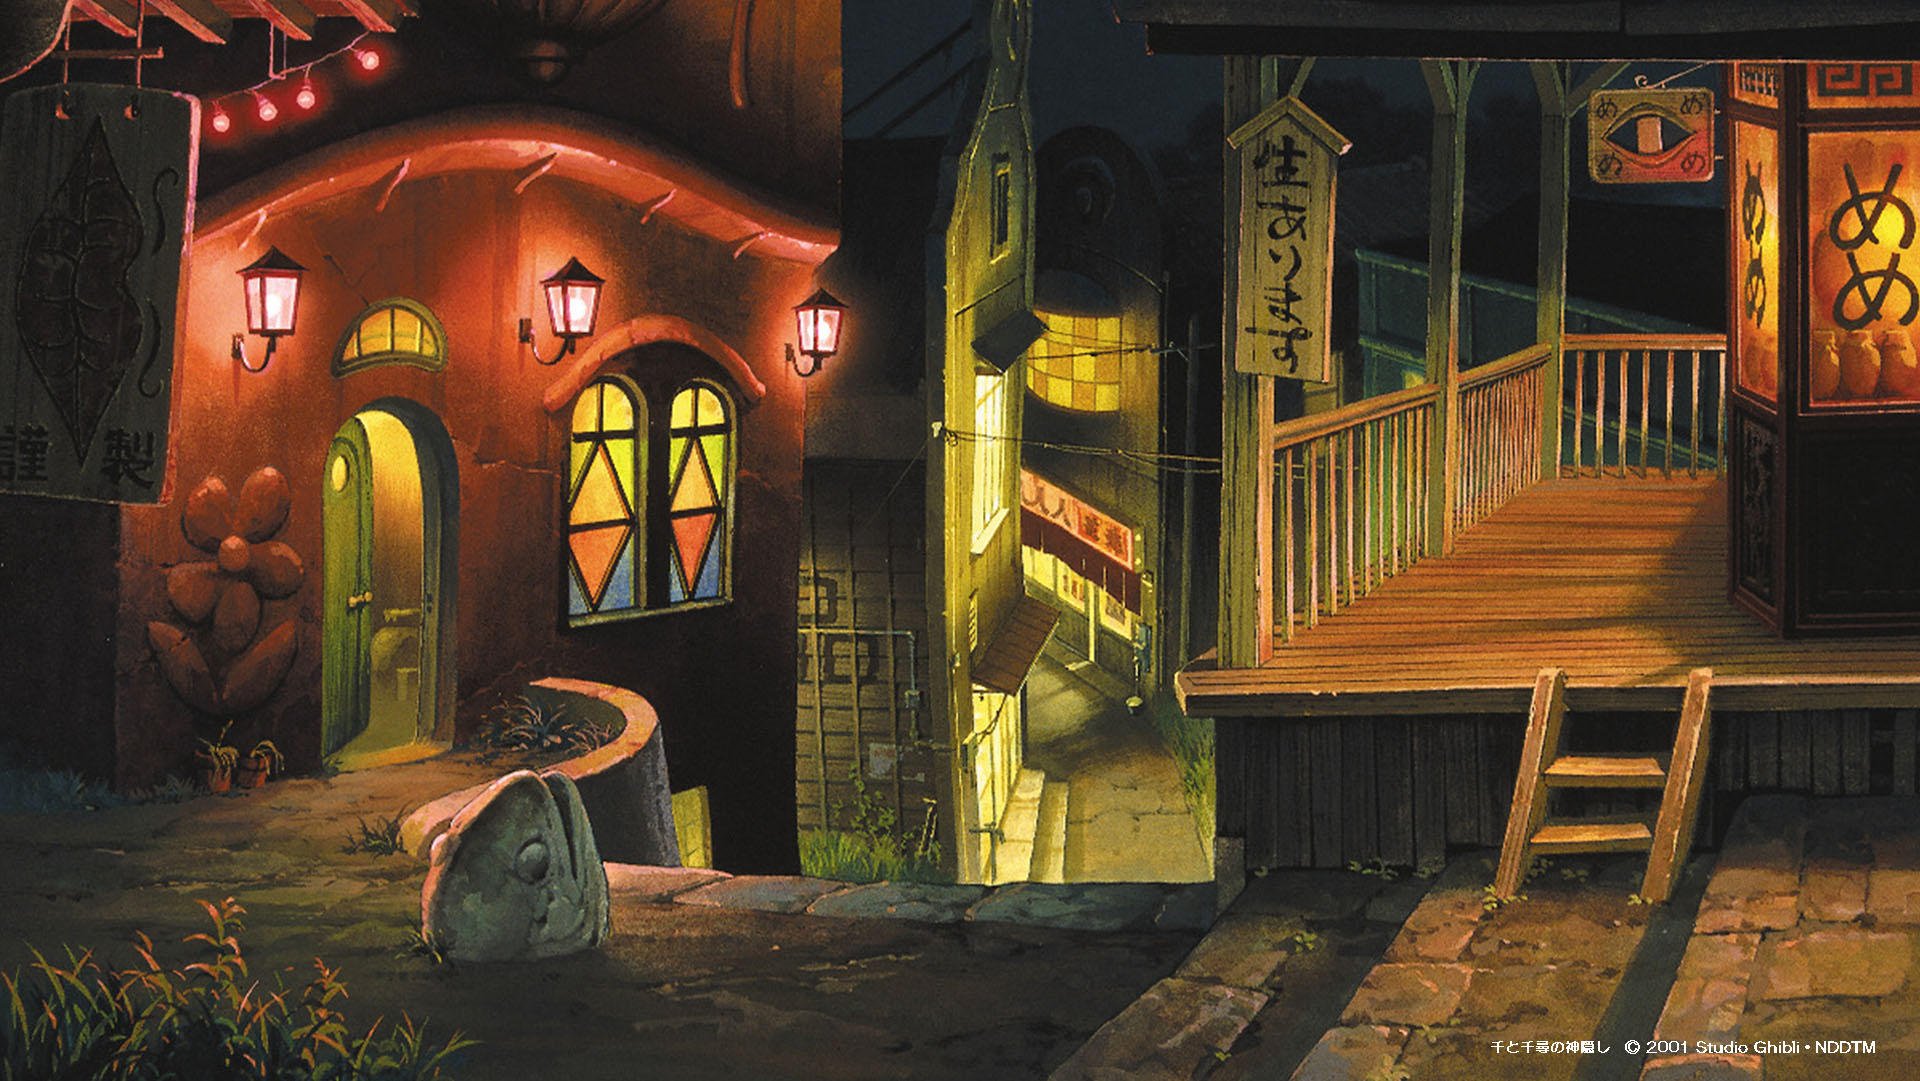 Studio Ghibli just released free wallpaper for use as video call background